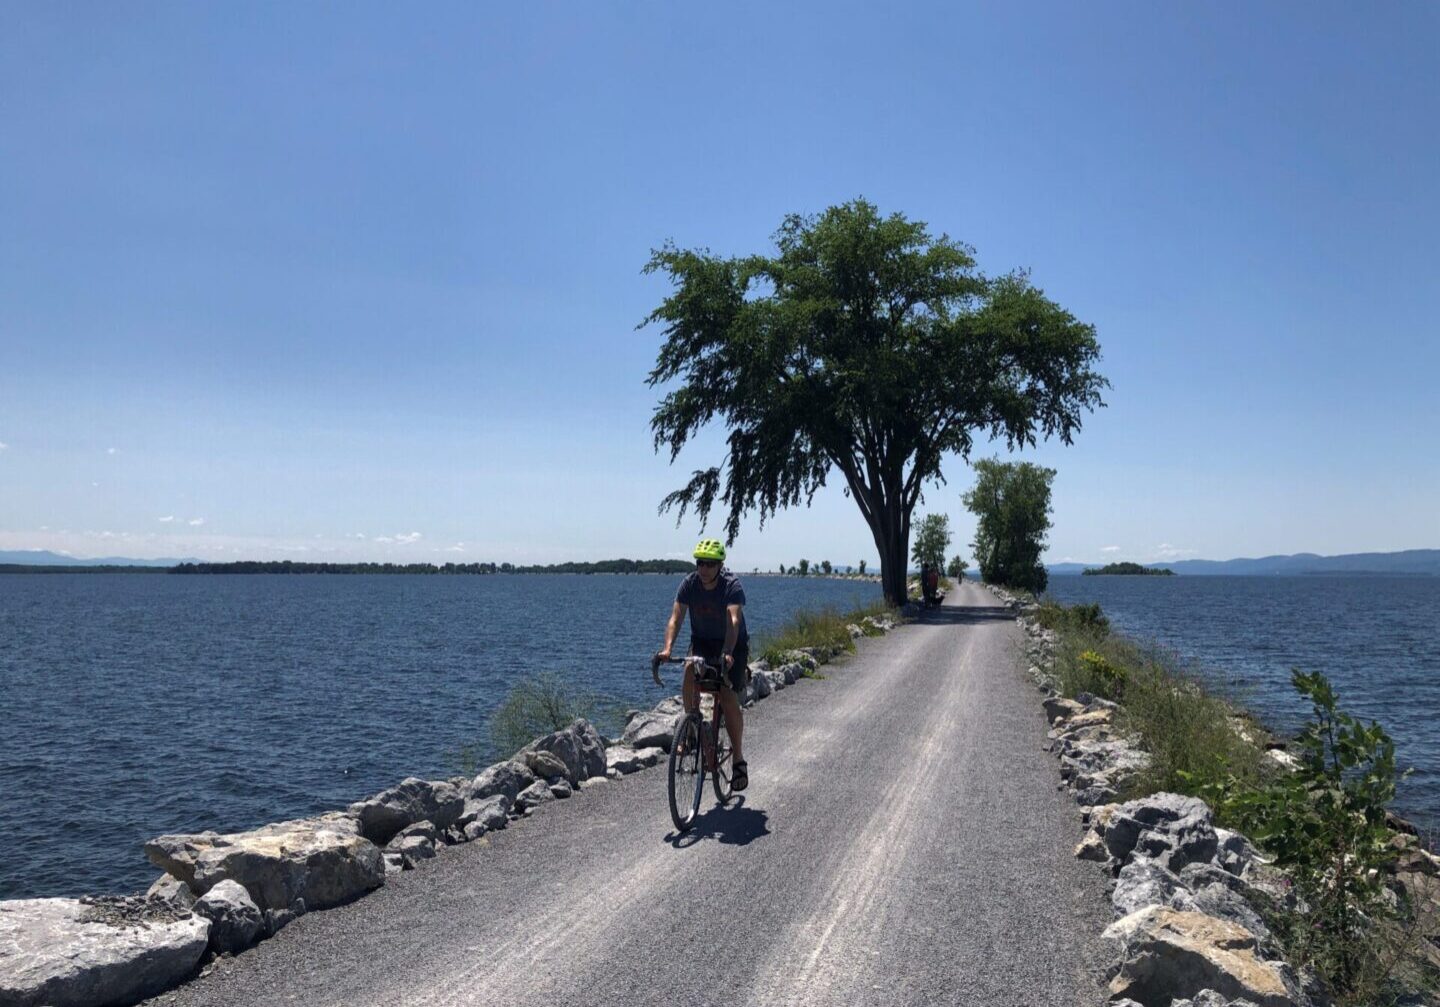 A person riding a bike on the side of a road near water.